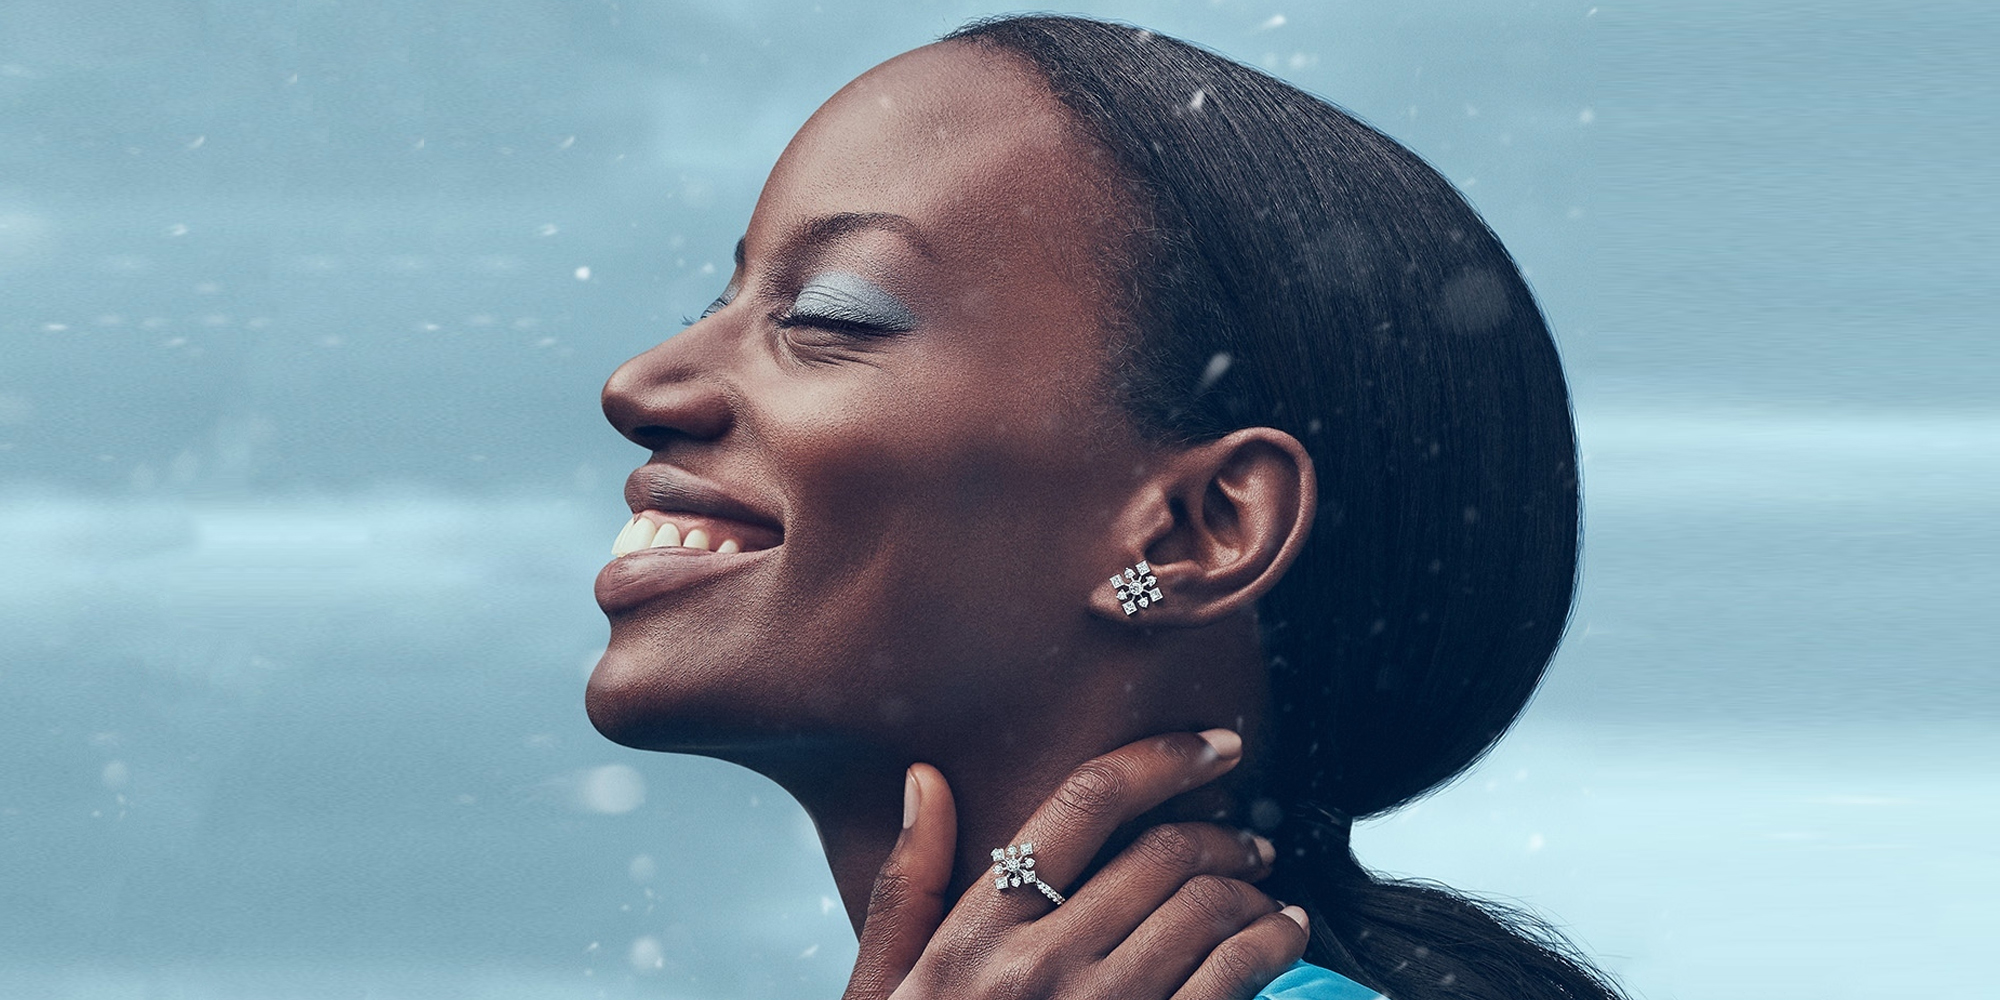 MAISON BIRKS SNOWFLAKE HIGH JEWELRY COLLECTION